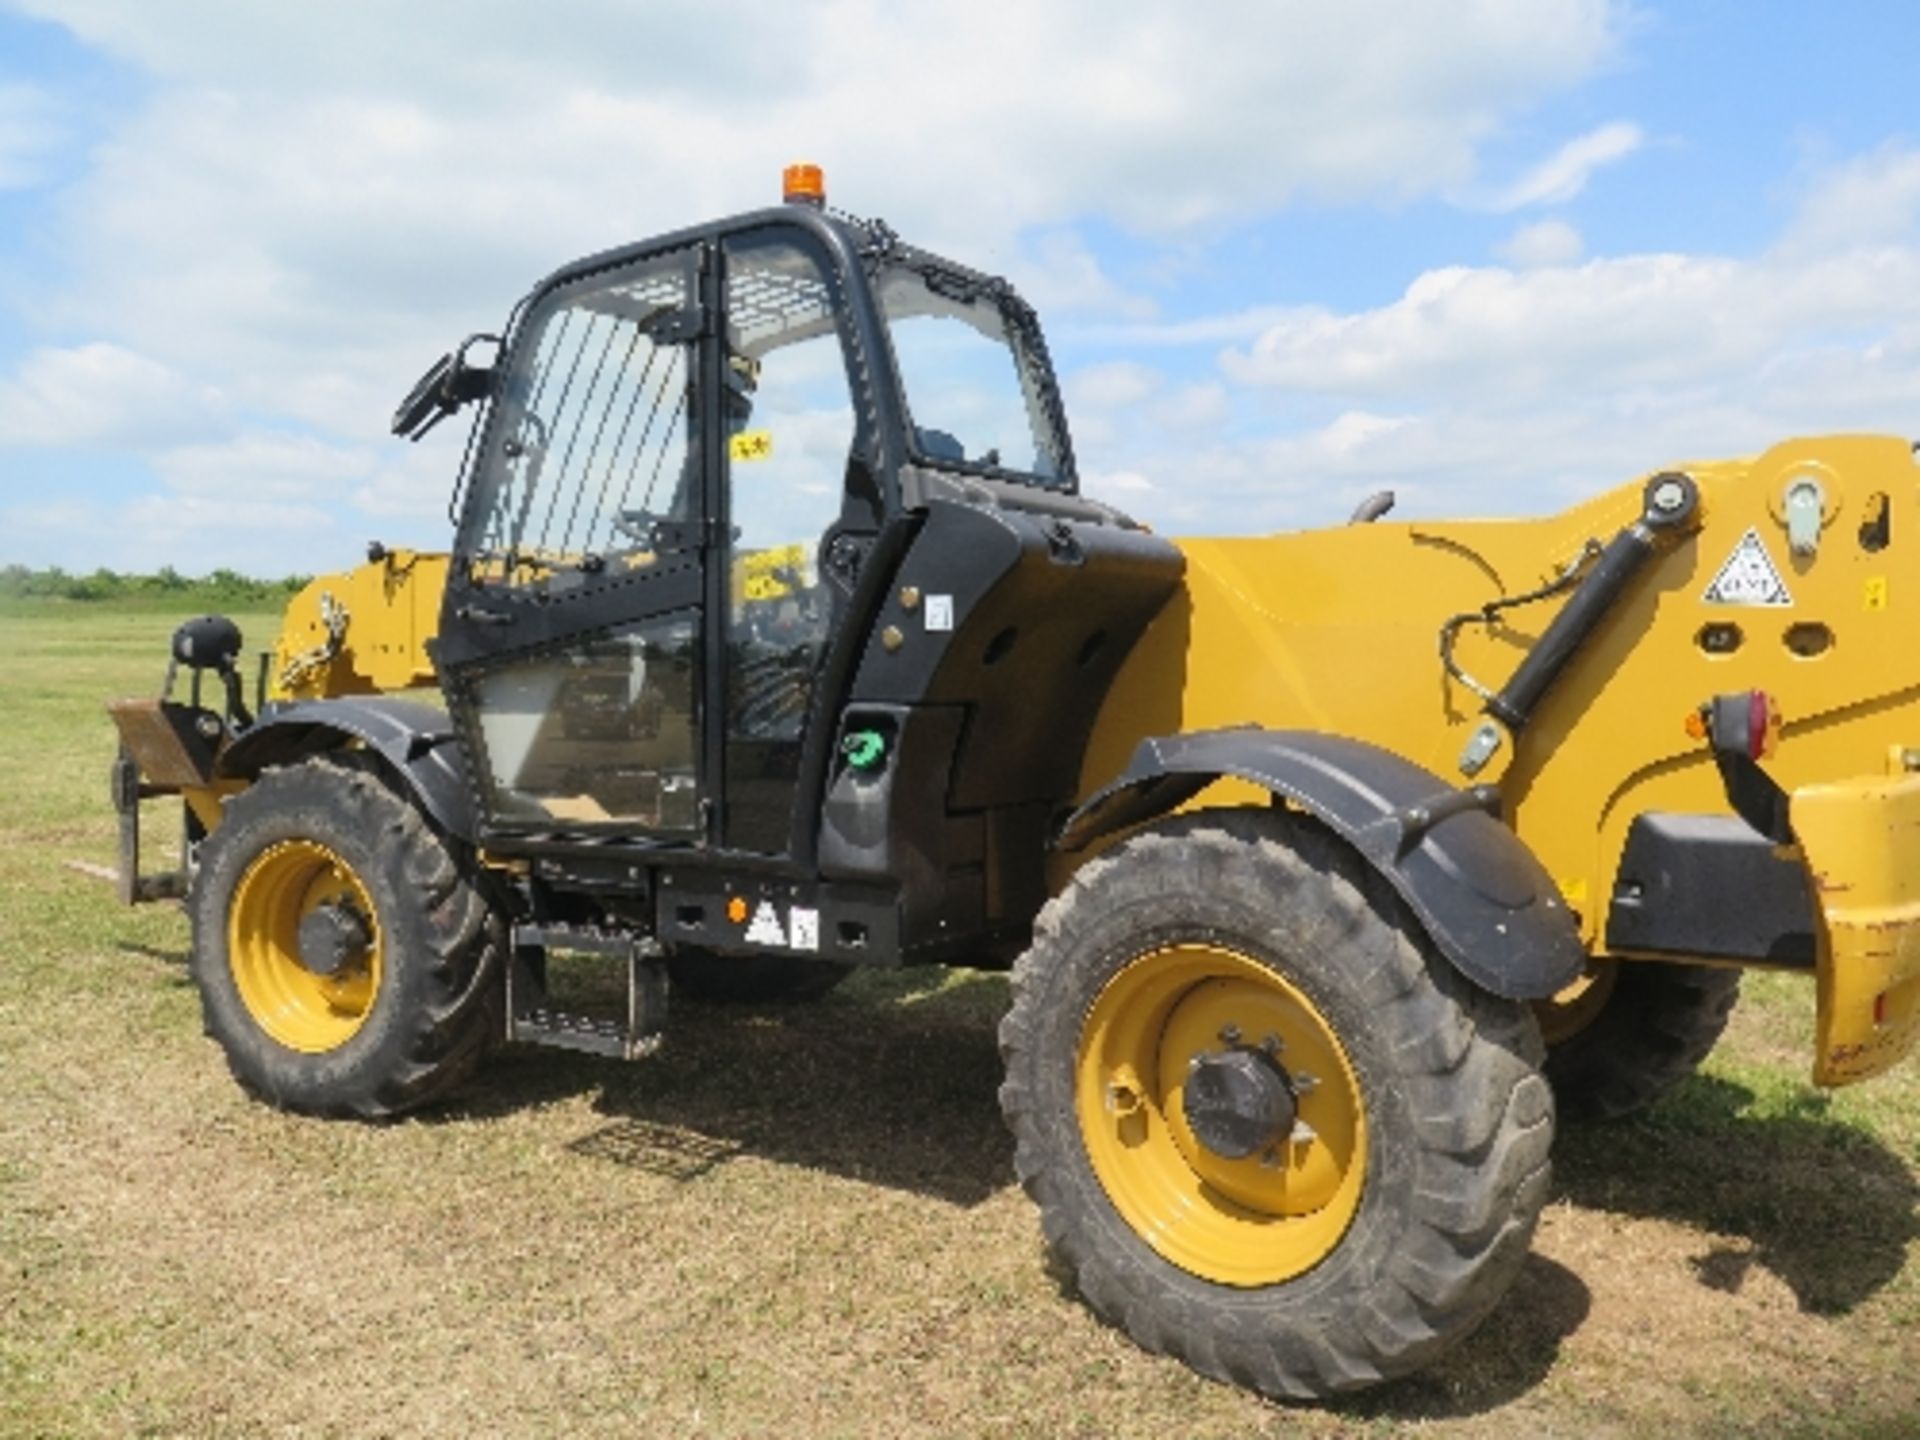 Caterpillar TH414STD telehandler 2480 hrs 2011 TBZ00699
This lot is included by kind permission